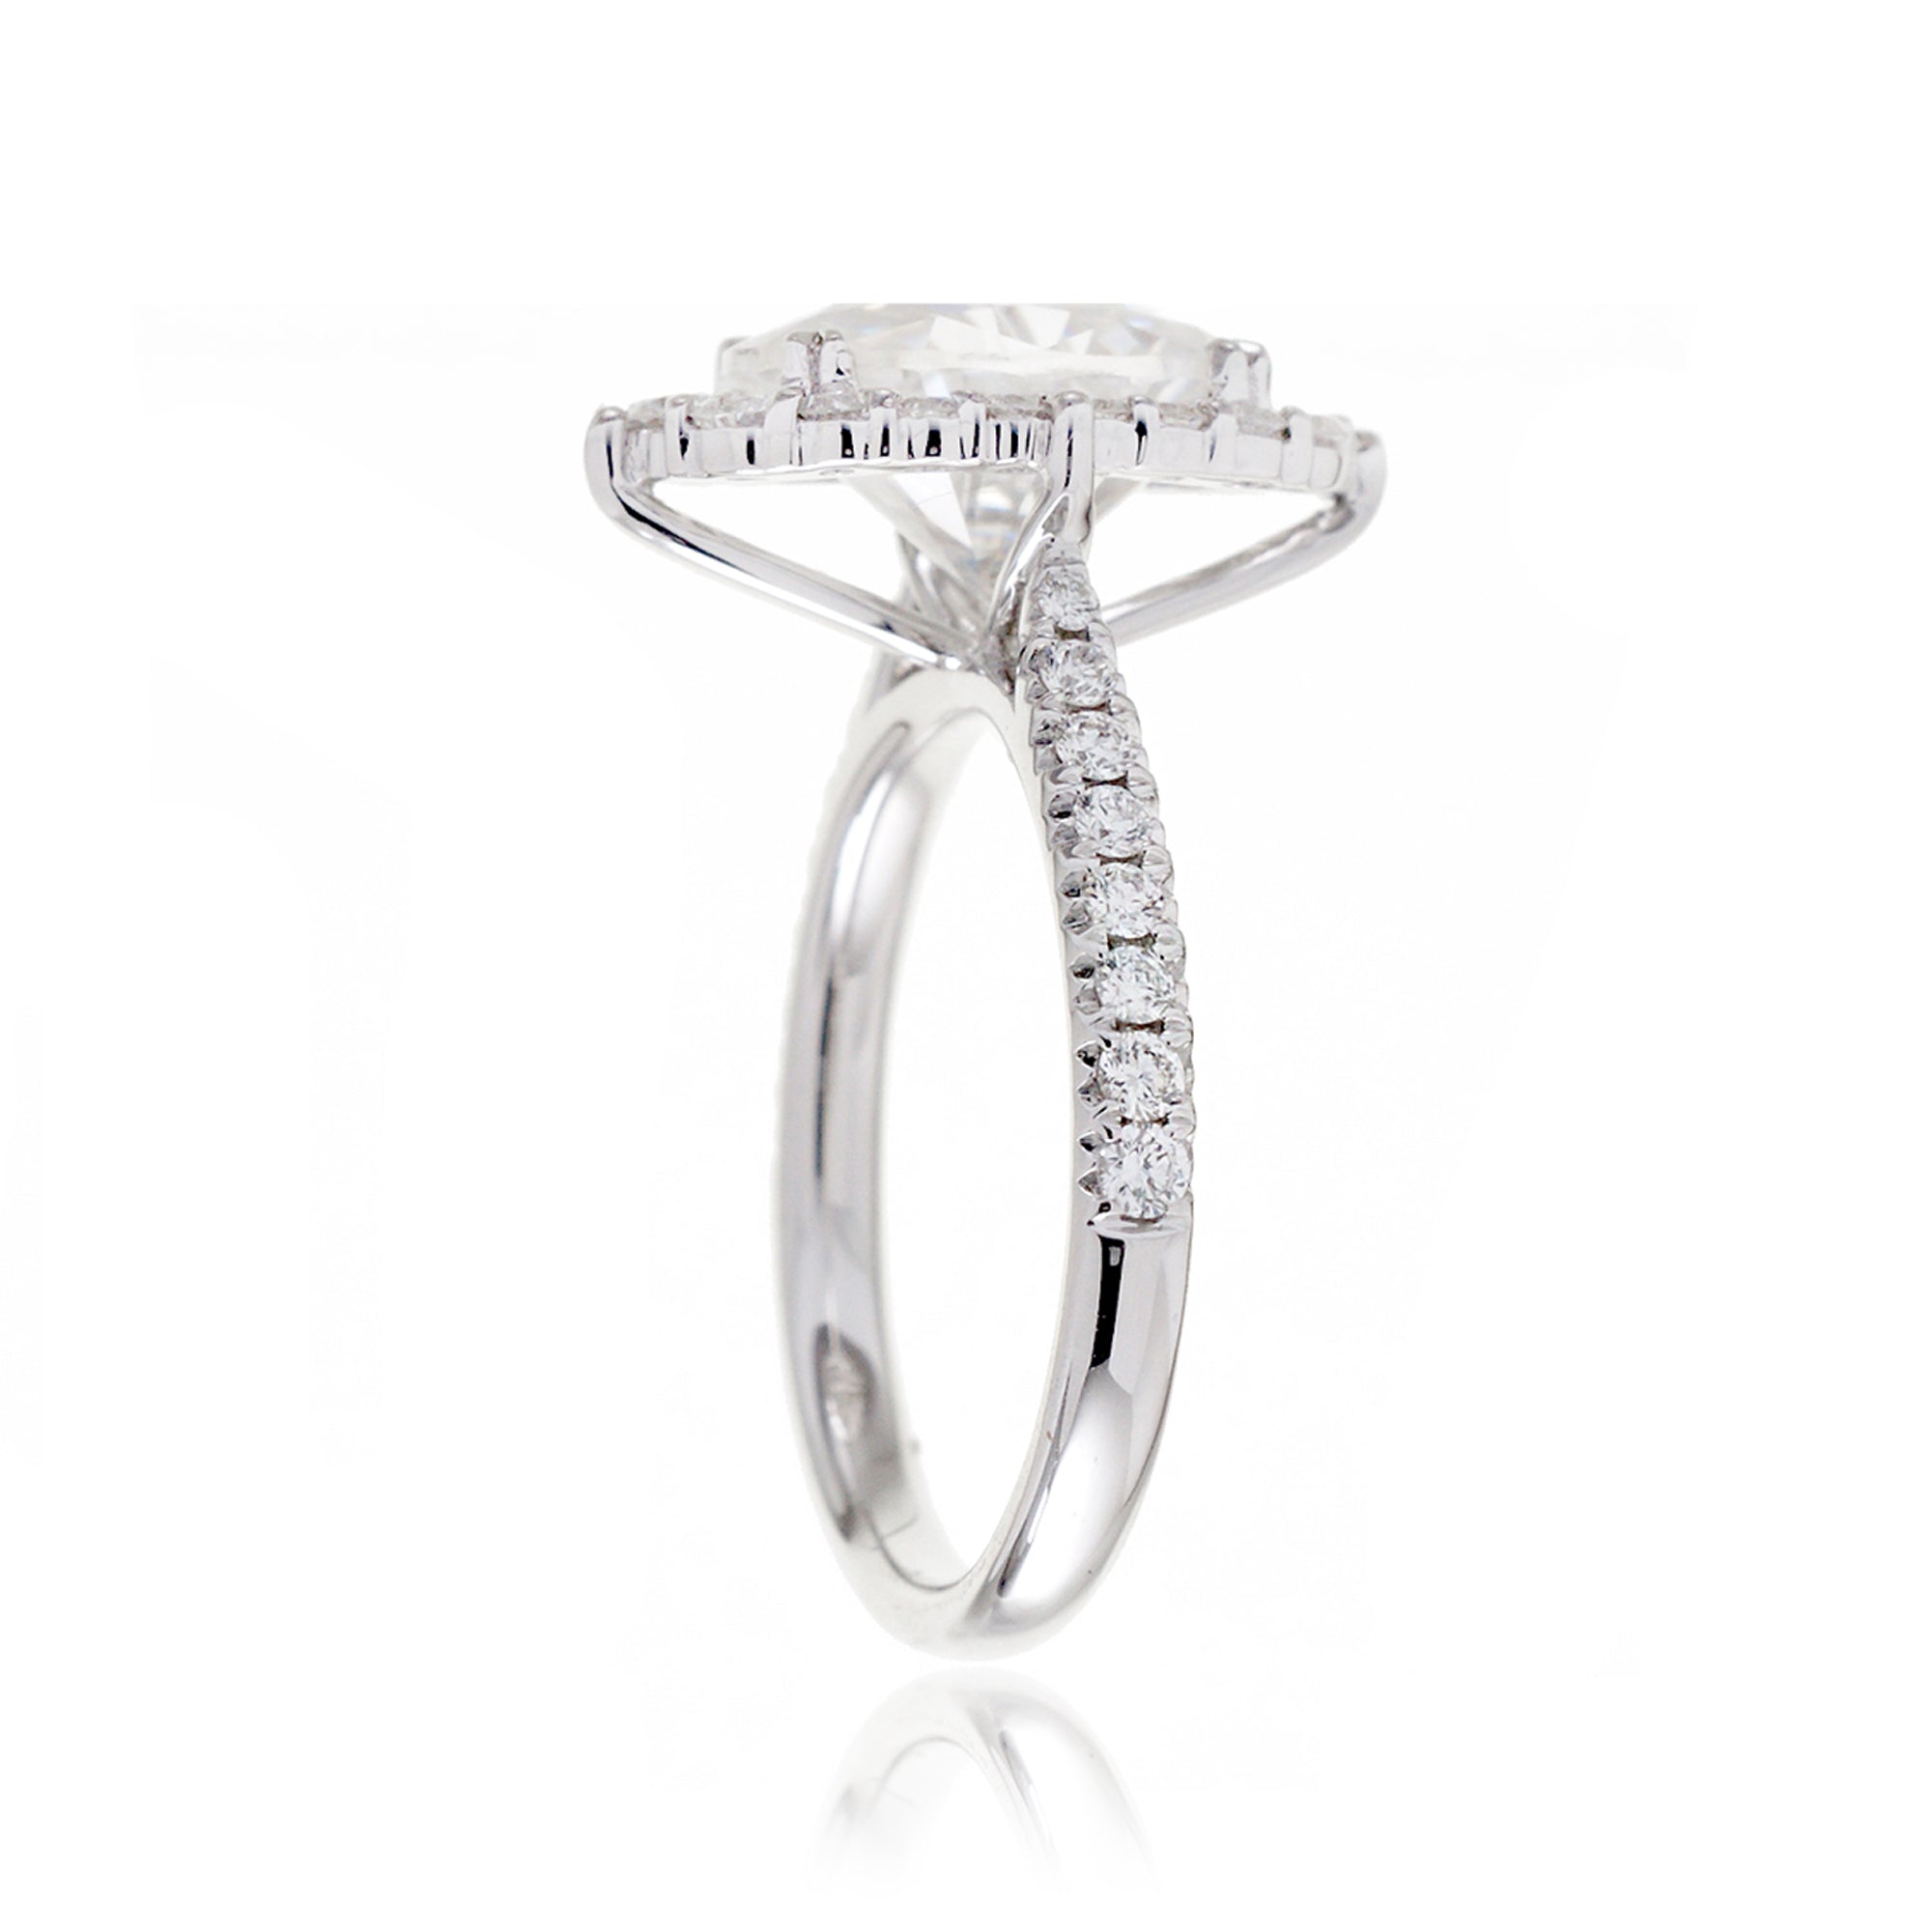 The Haley Oval Moissanite Ring